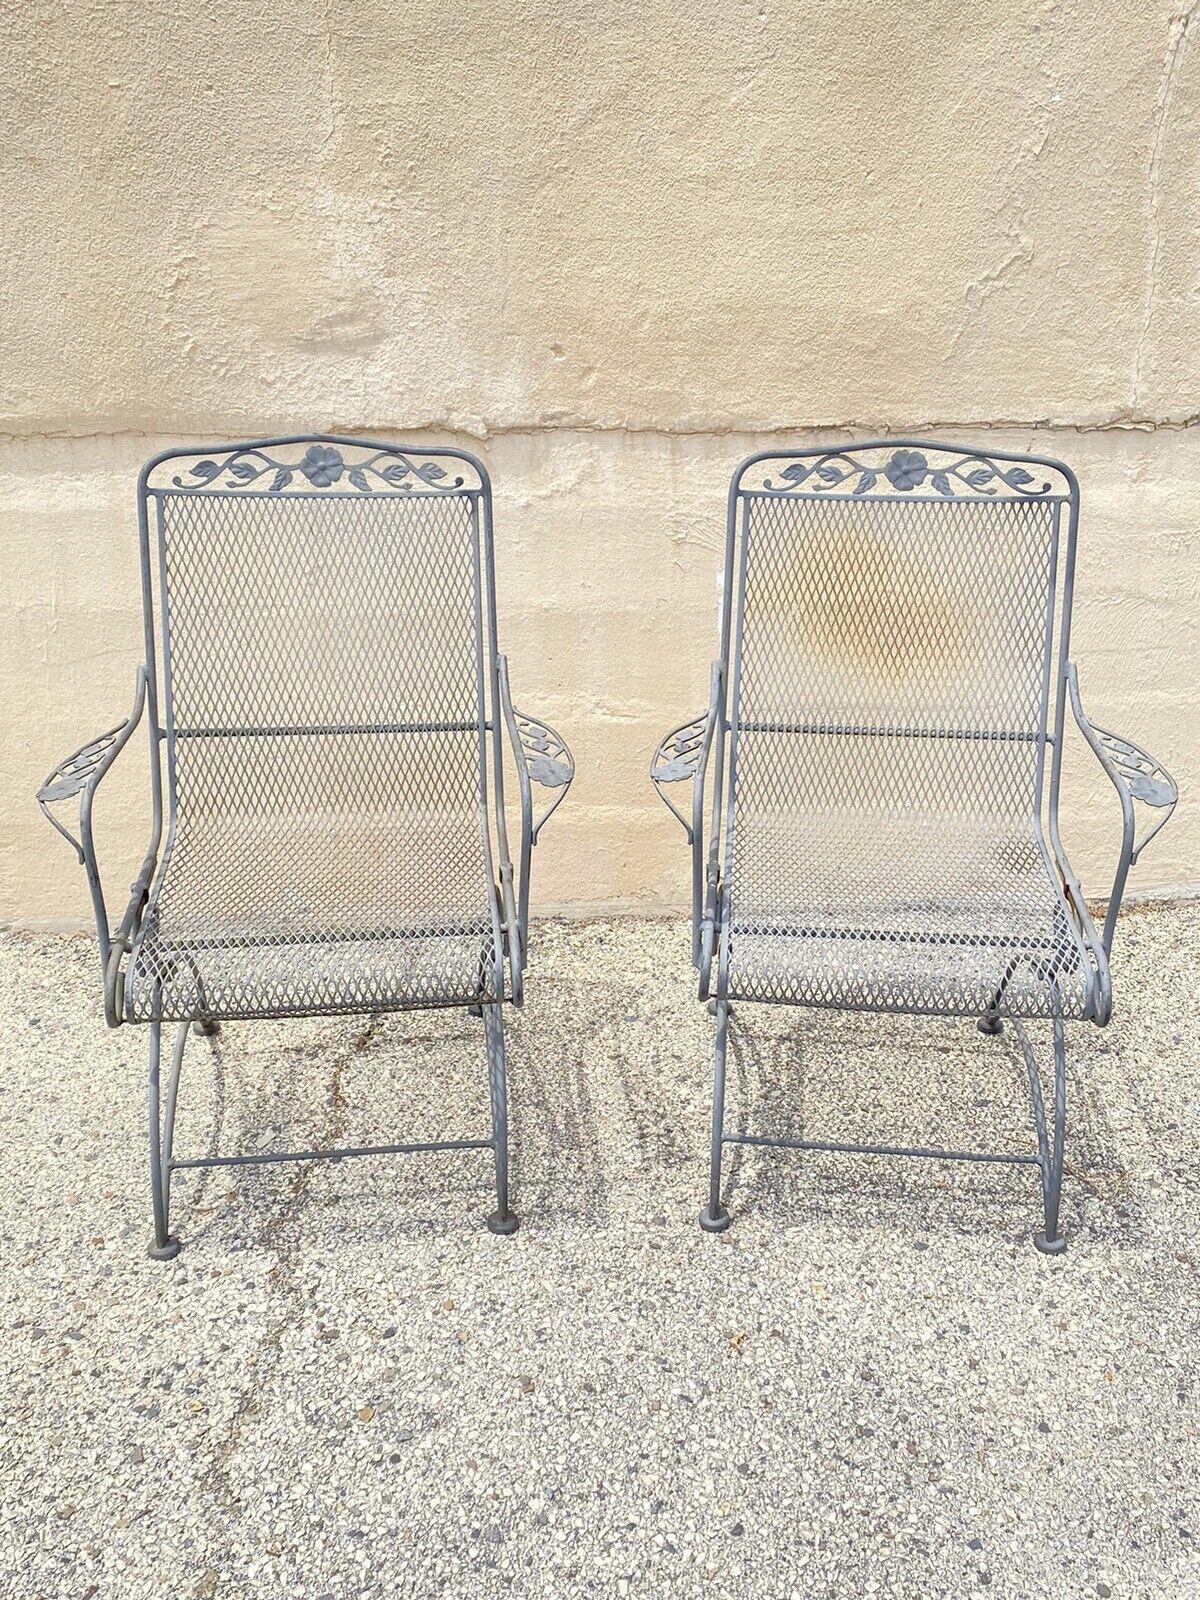 Vintage Meadowcraft Dogwood Coil Spring Wrought Iron Garden Patio Lounge Chair - a Pair. circa late 20th century. Measurements: 38